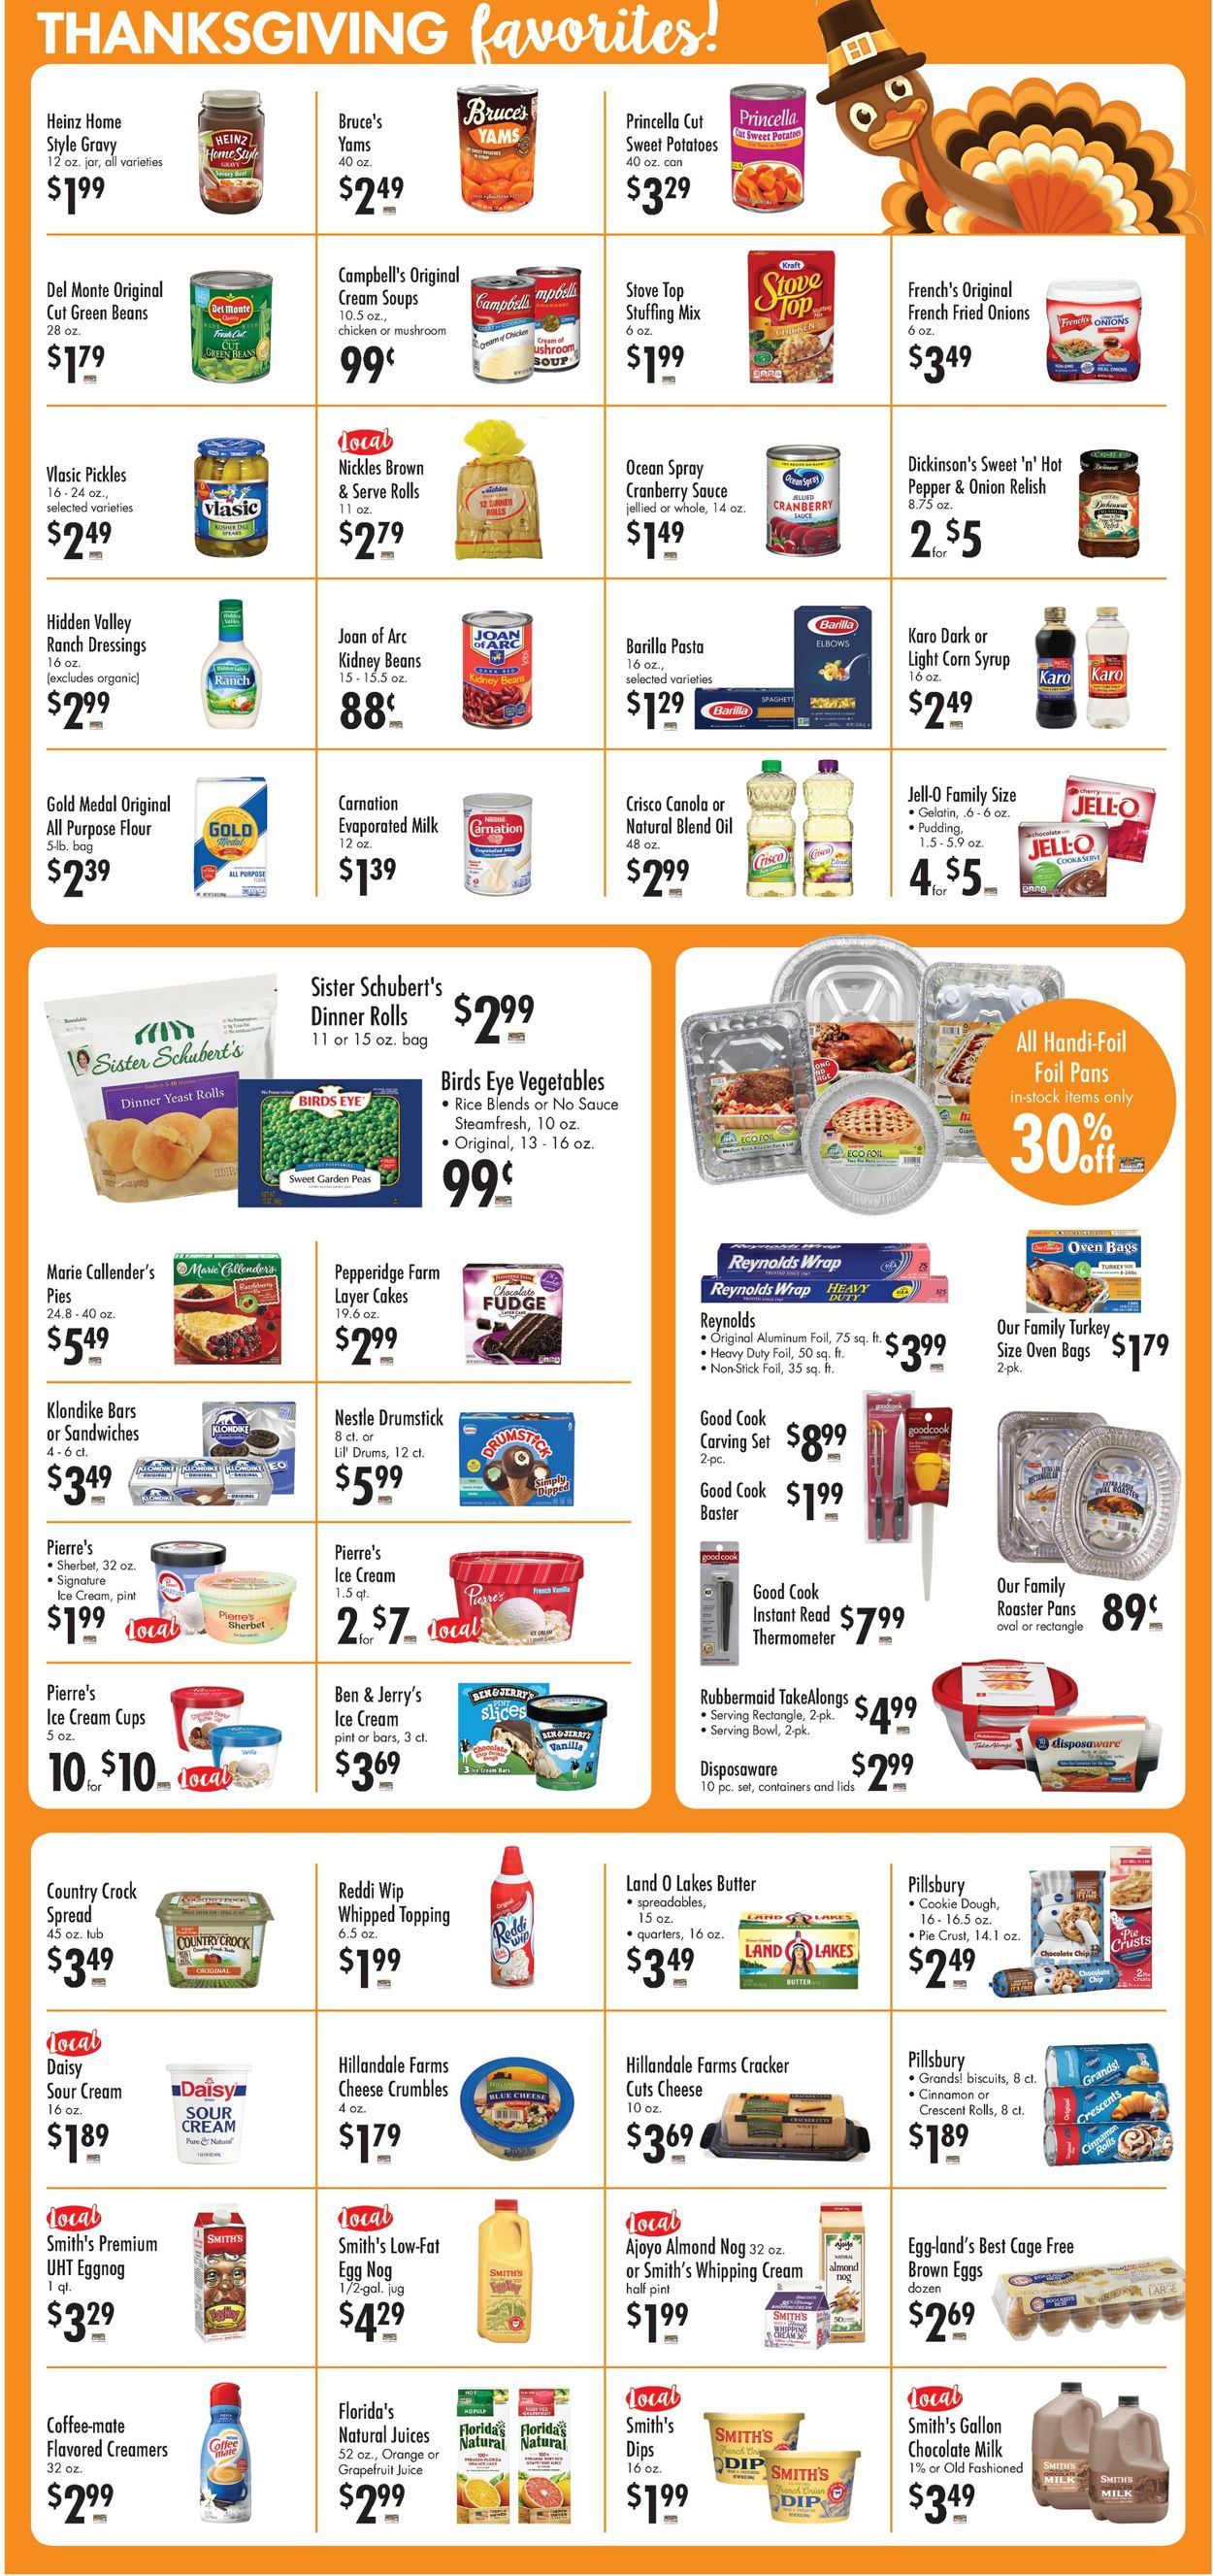 Buehler's Fresh Foods Thanksgiving 2020 Ad Weekly Ad Circular - valid 11/18-11/26/2020 (Page 5)